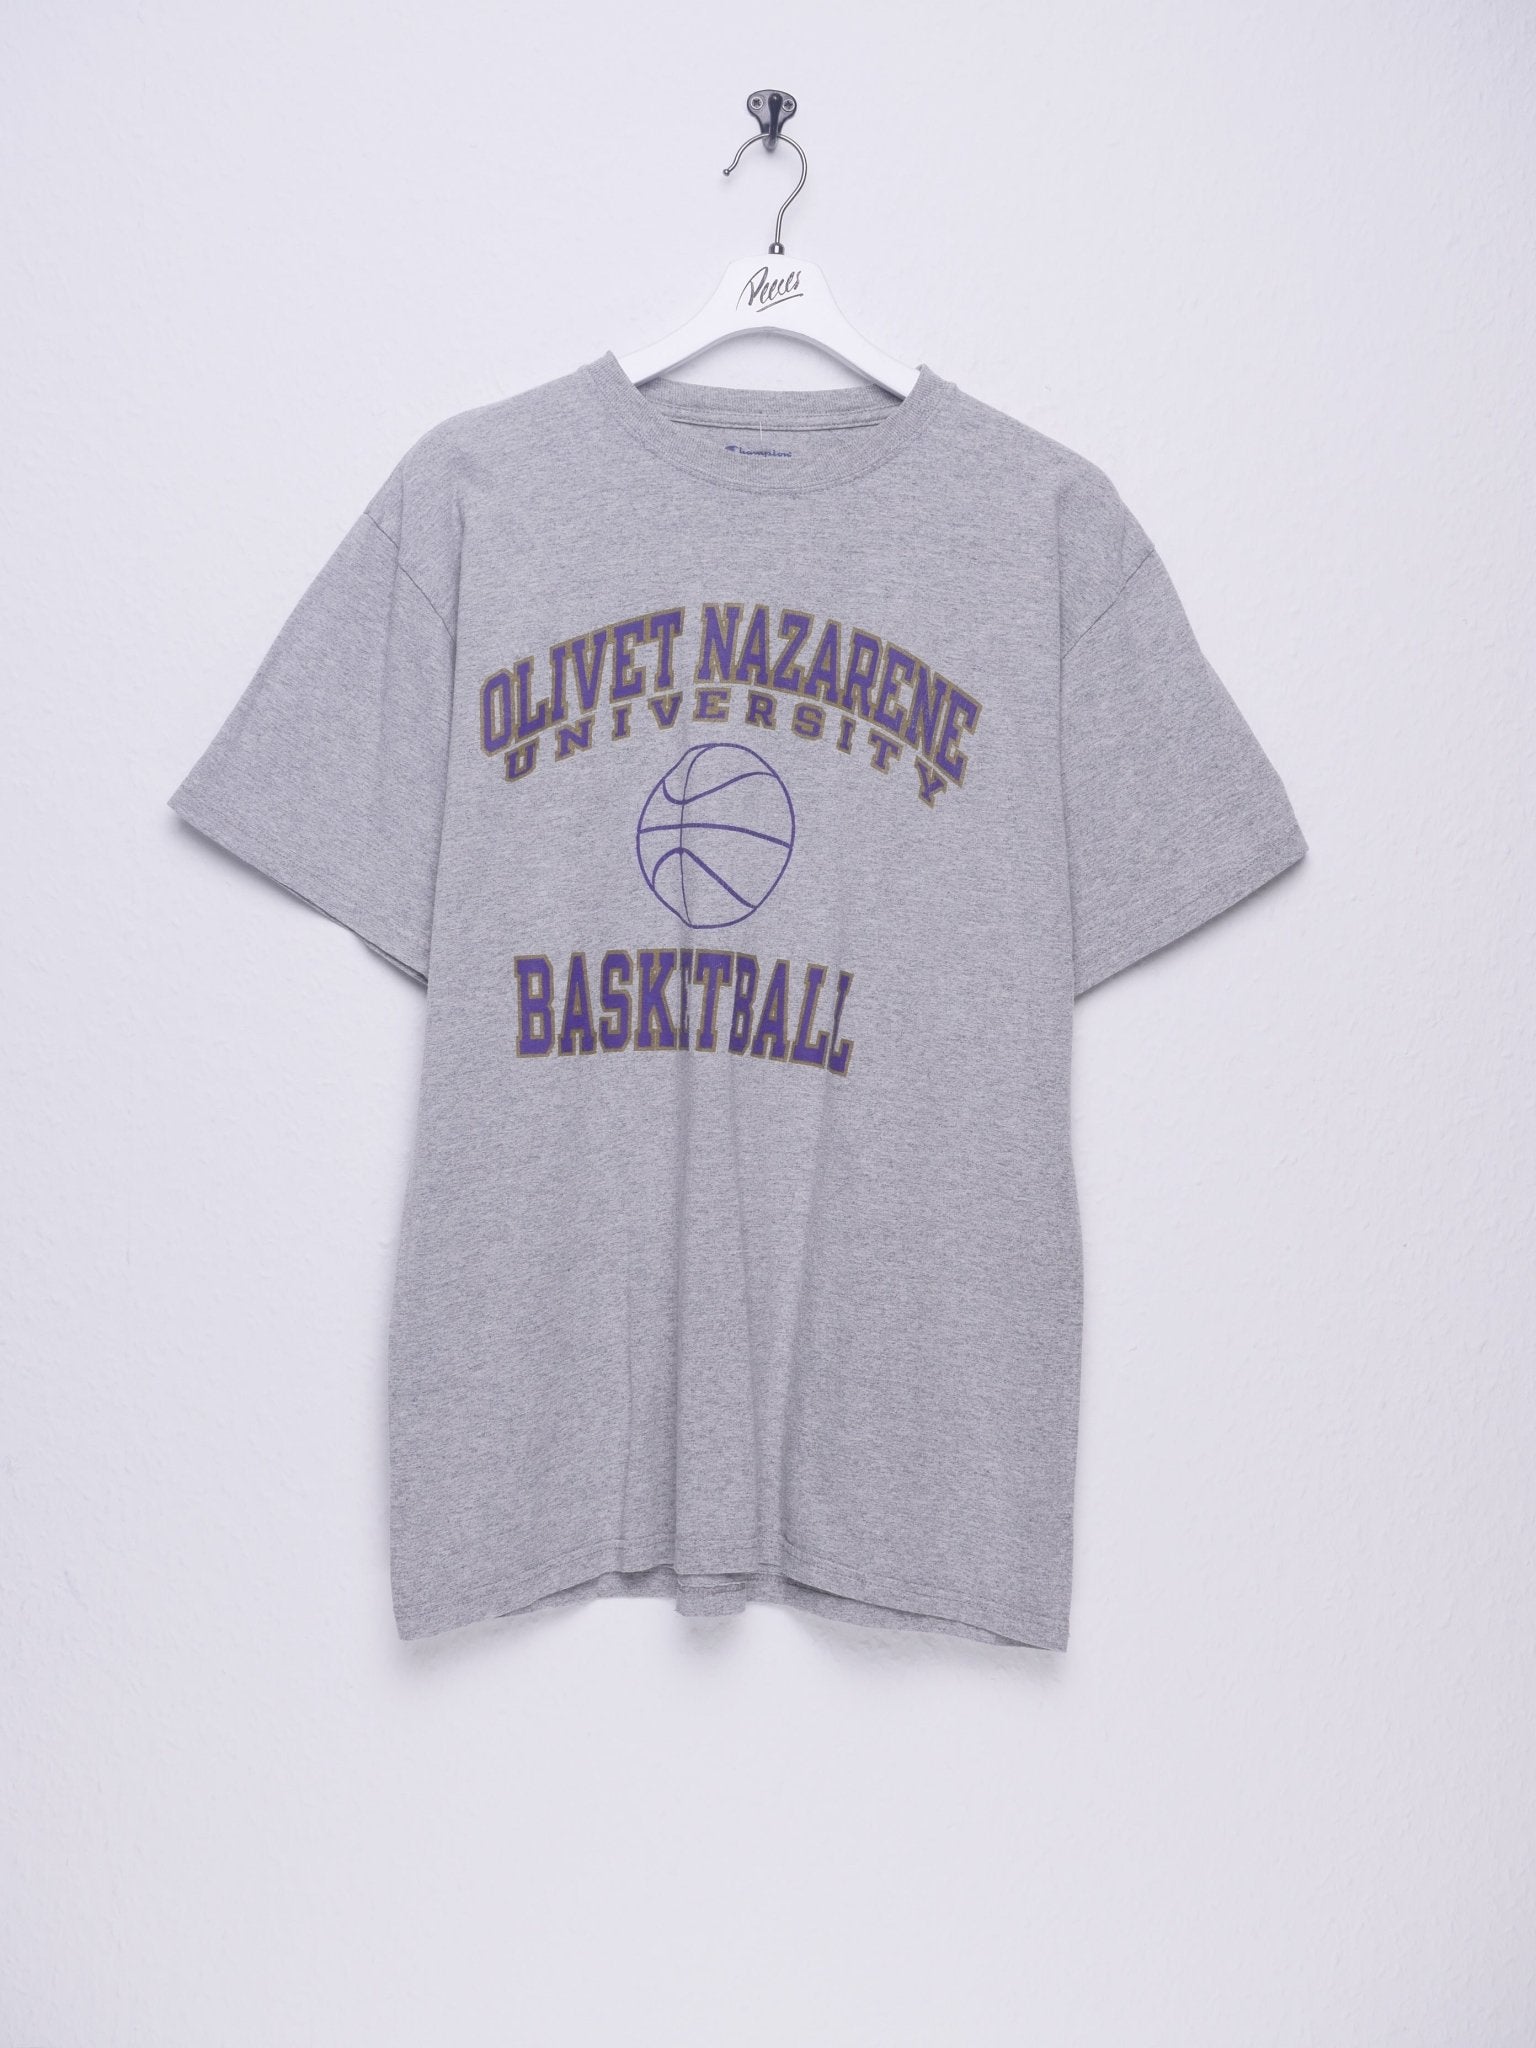 Champion printed Spellout Basketball Graphic grey Shirt - Peeces